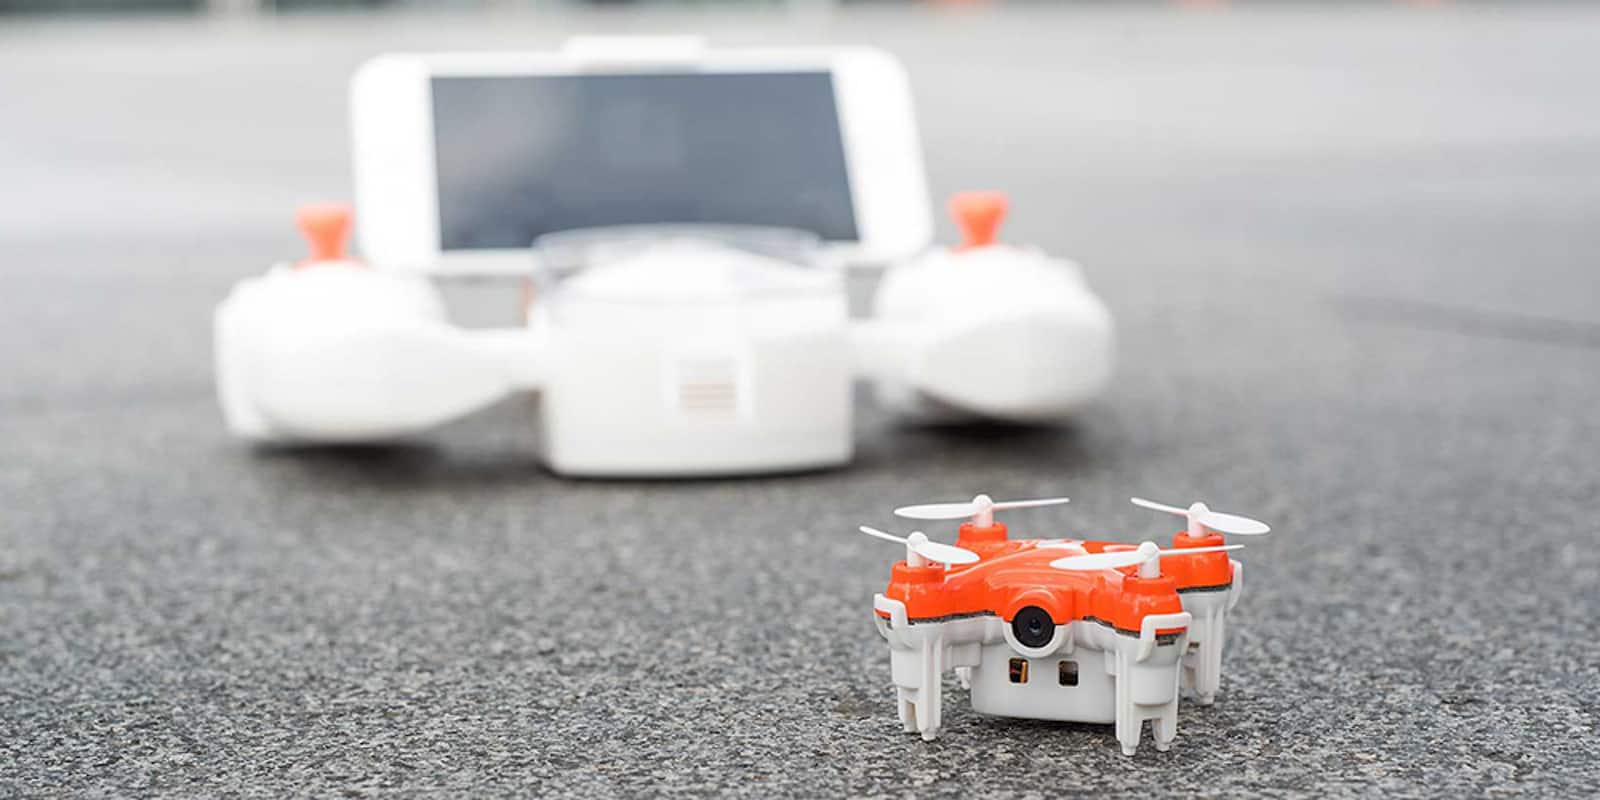 This teensy drone manages to send real-time, HD video straight to your phone.